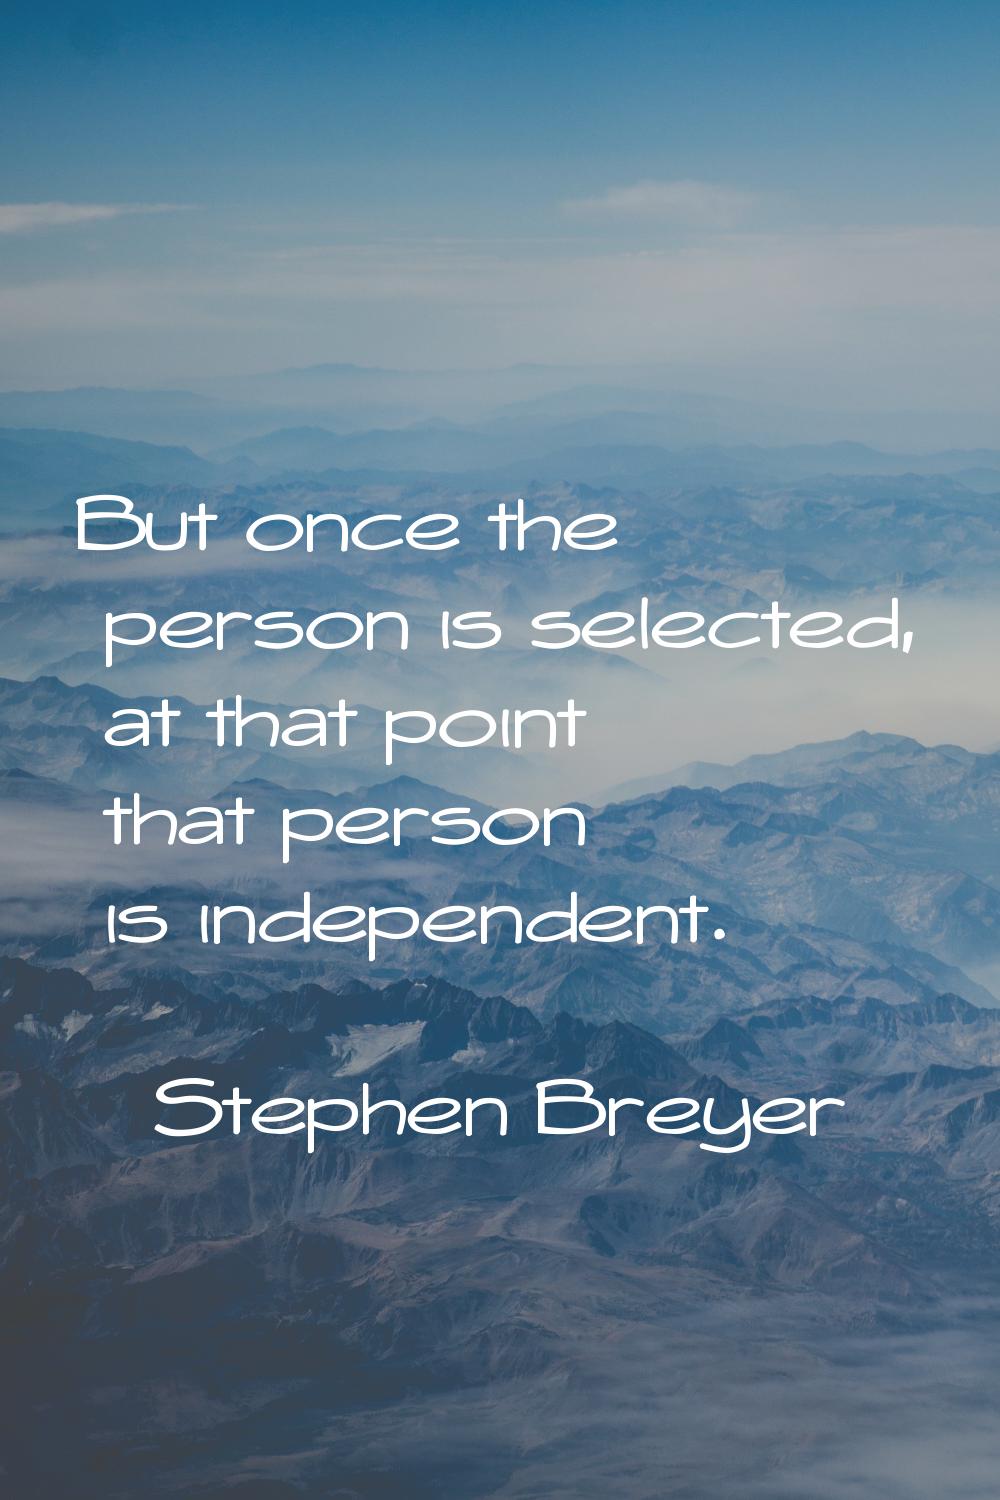 But once the person is selected, at that point that person is independent.